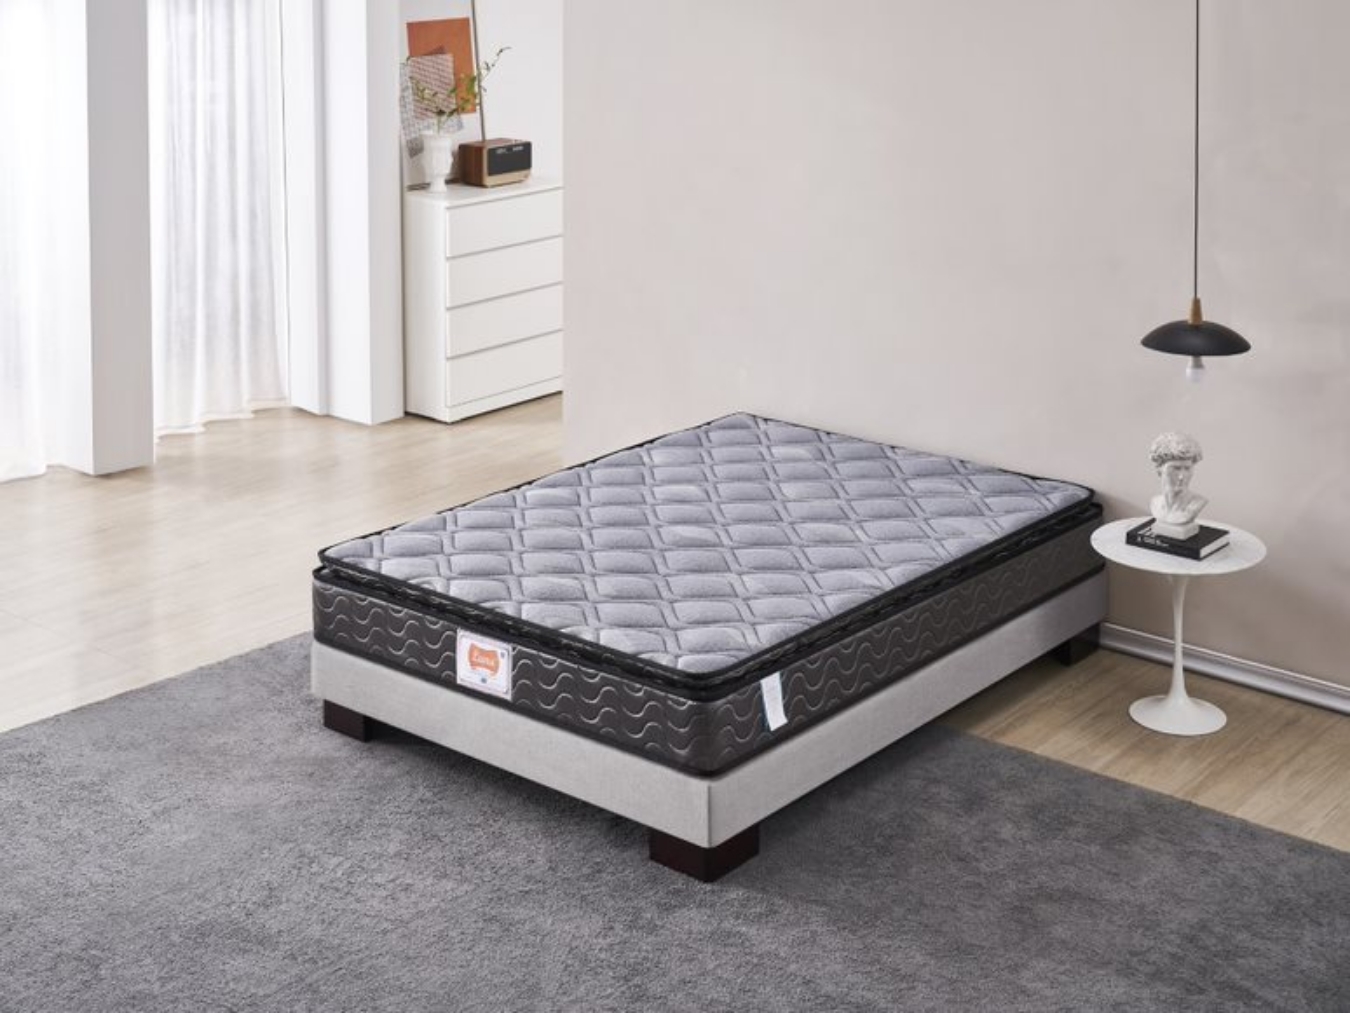 This mattress is suitable for those looking for a good quality mattress on a smaller budget. "LUNA QUEEN 1680 FIRE RETARDANT MATTRESS"